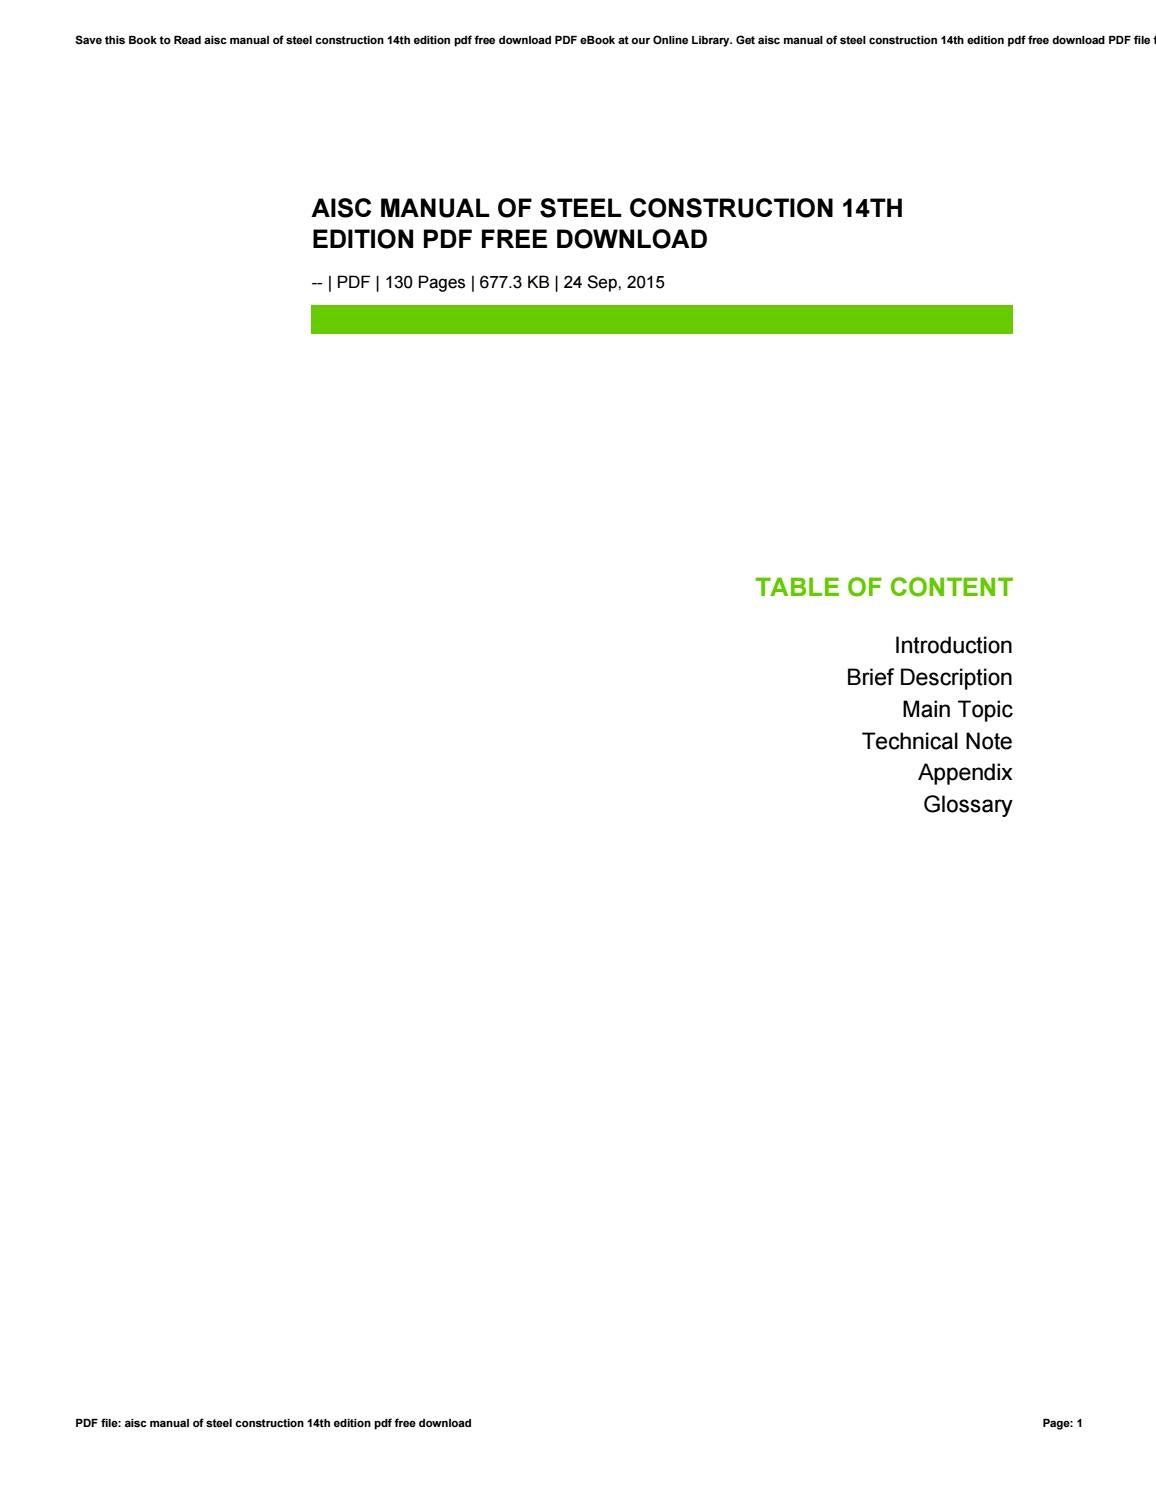 aisc lrfd manual of steel construction pdf